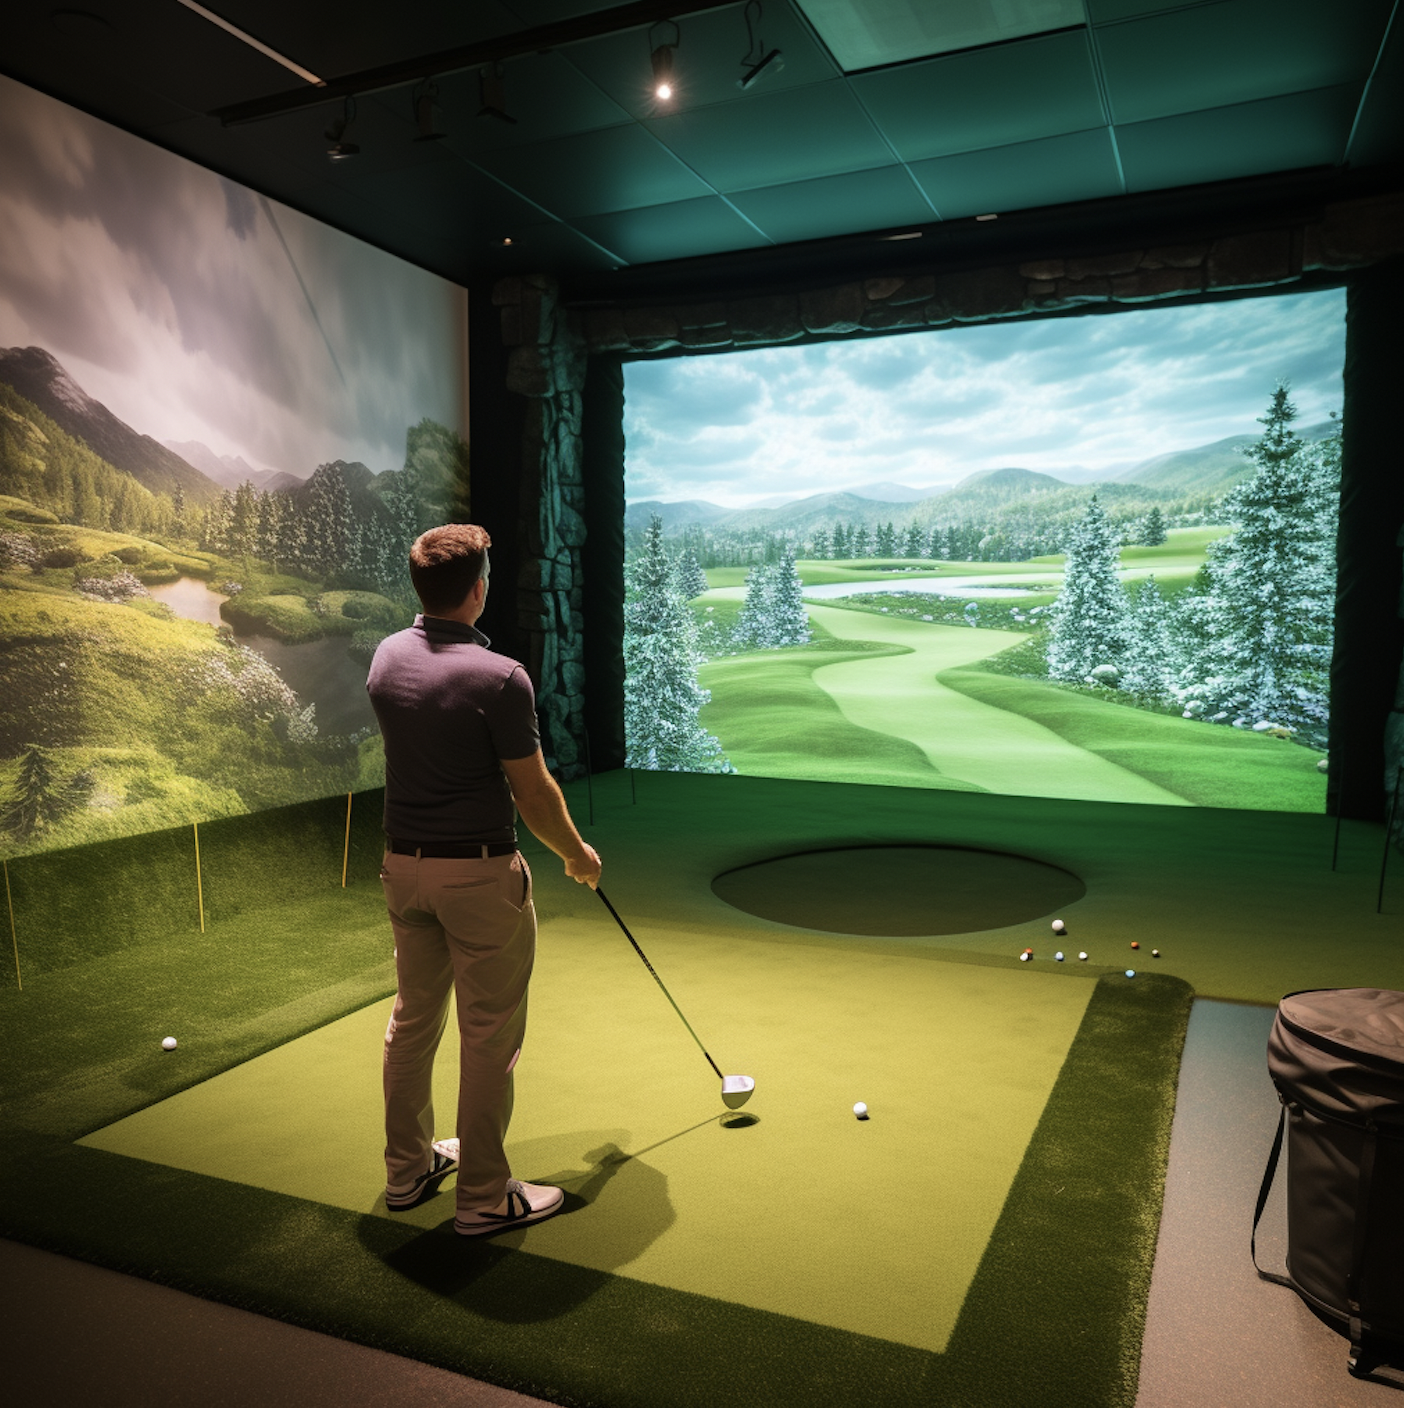 A man holding a golf club stands at the center of a golf simulator room.